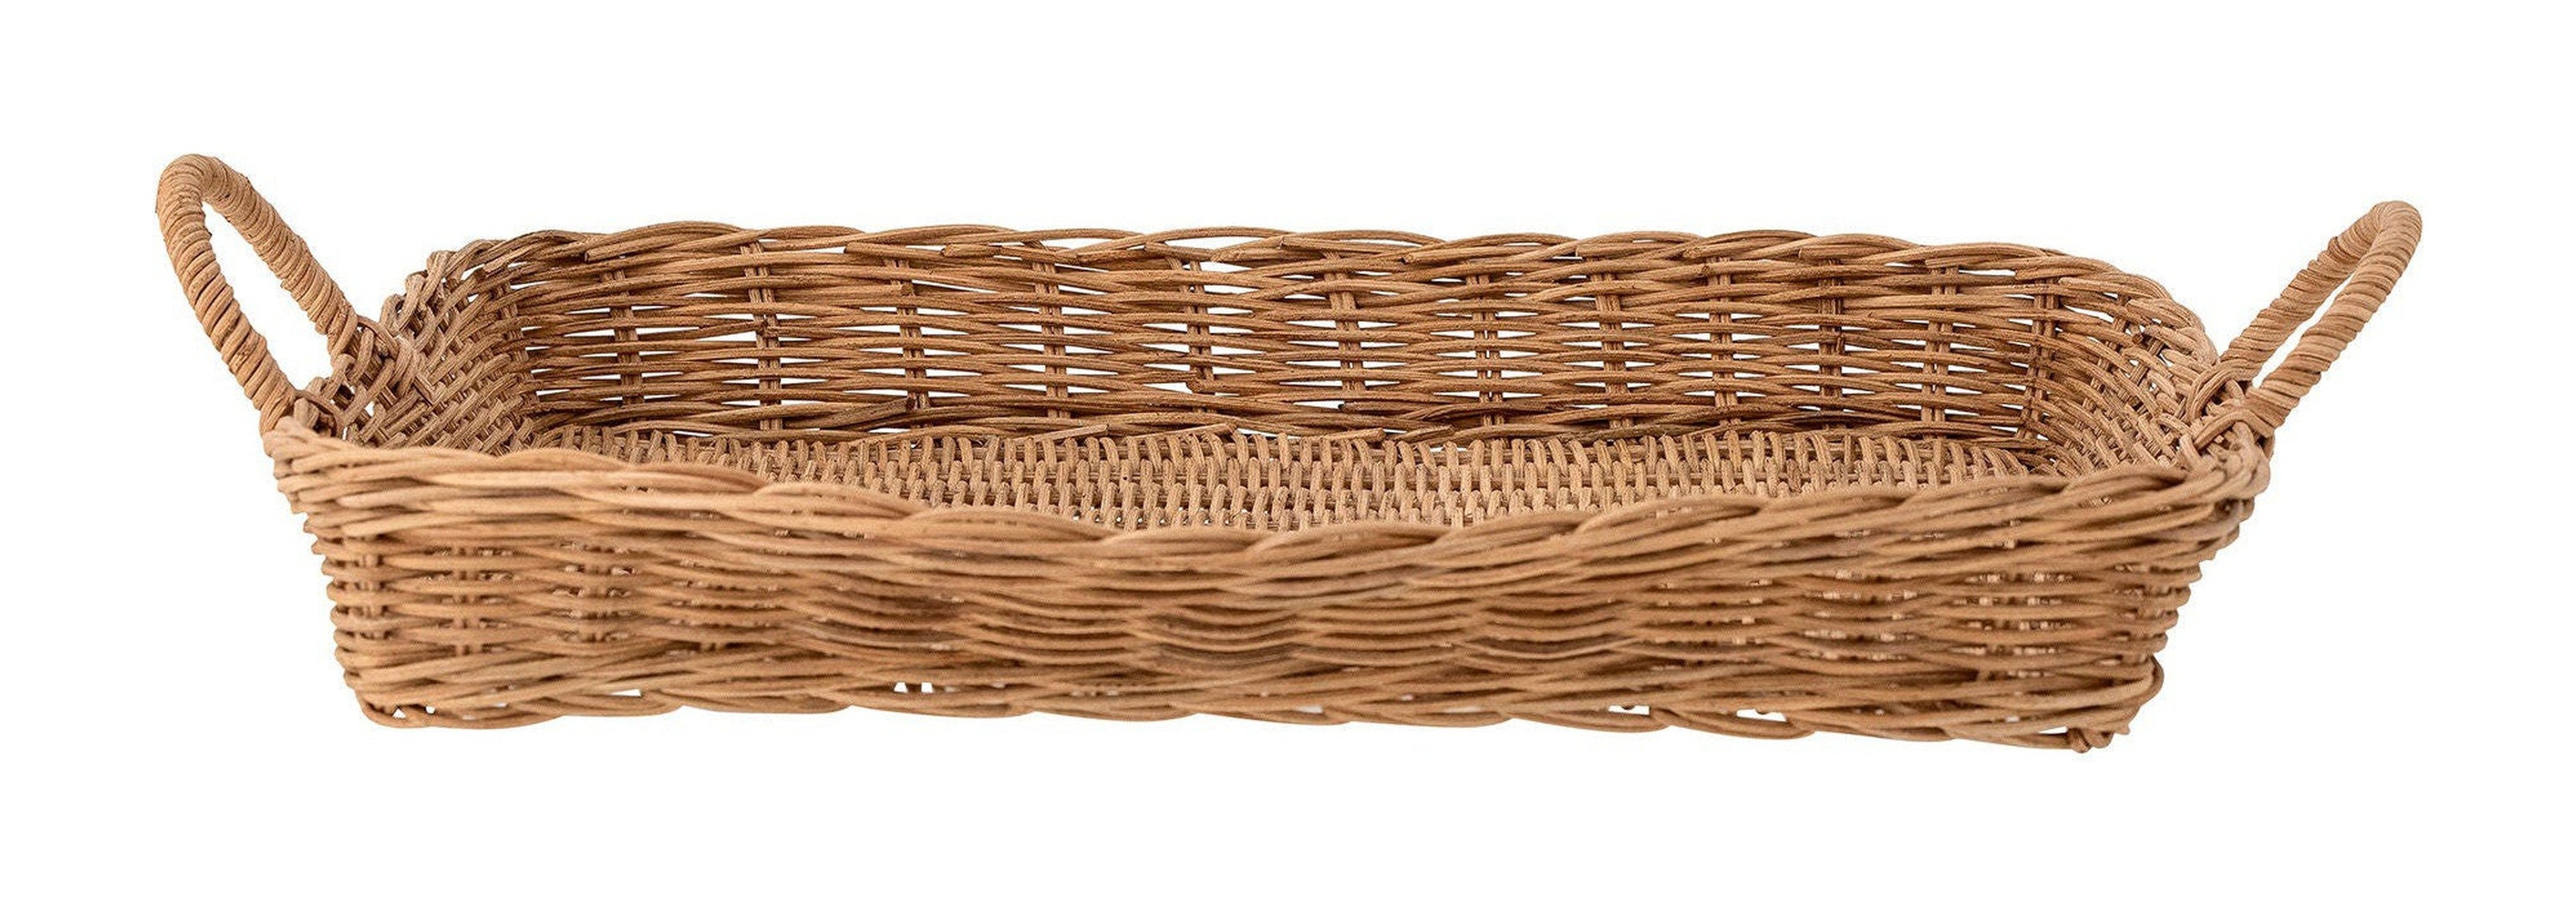 Bloomingville Angie Serving Tray, Nature, Rattan